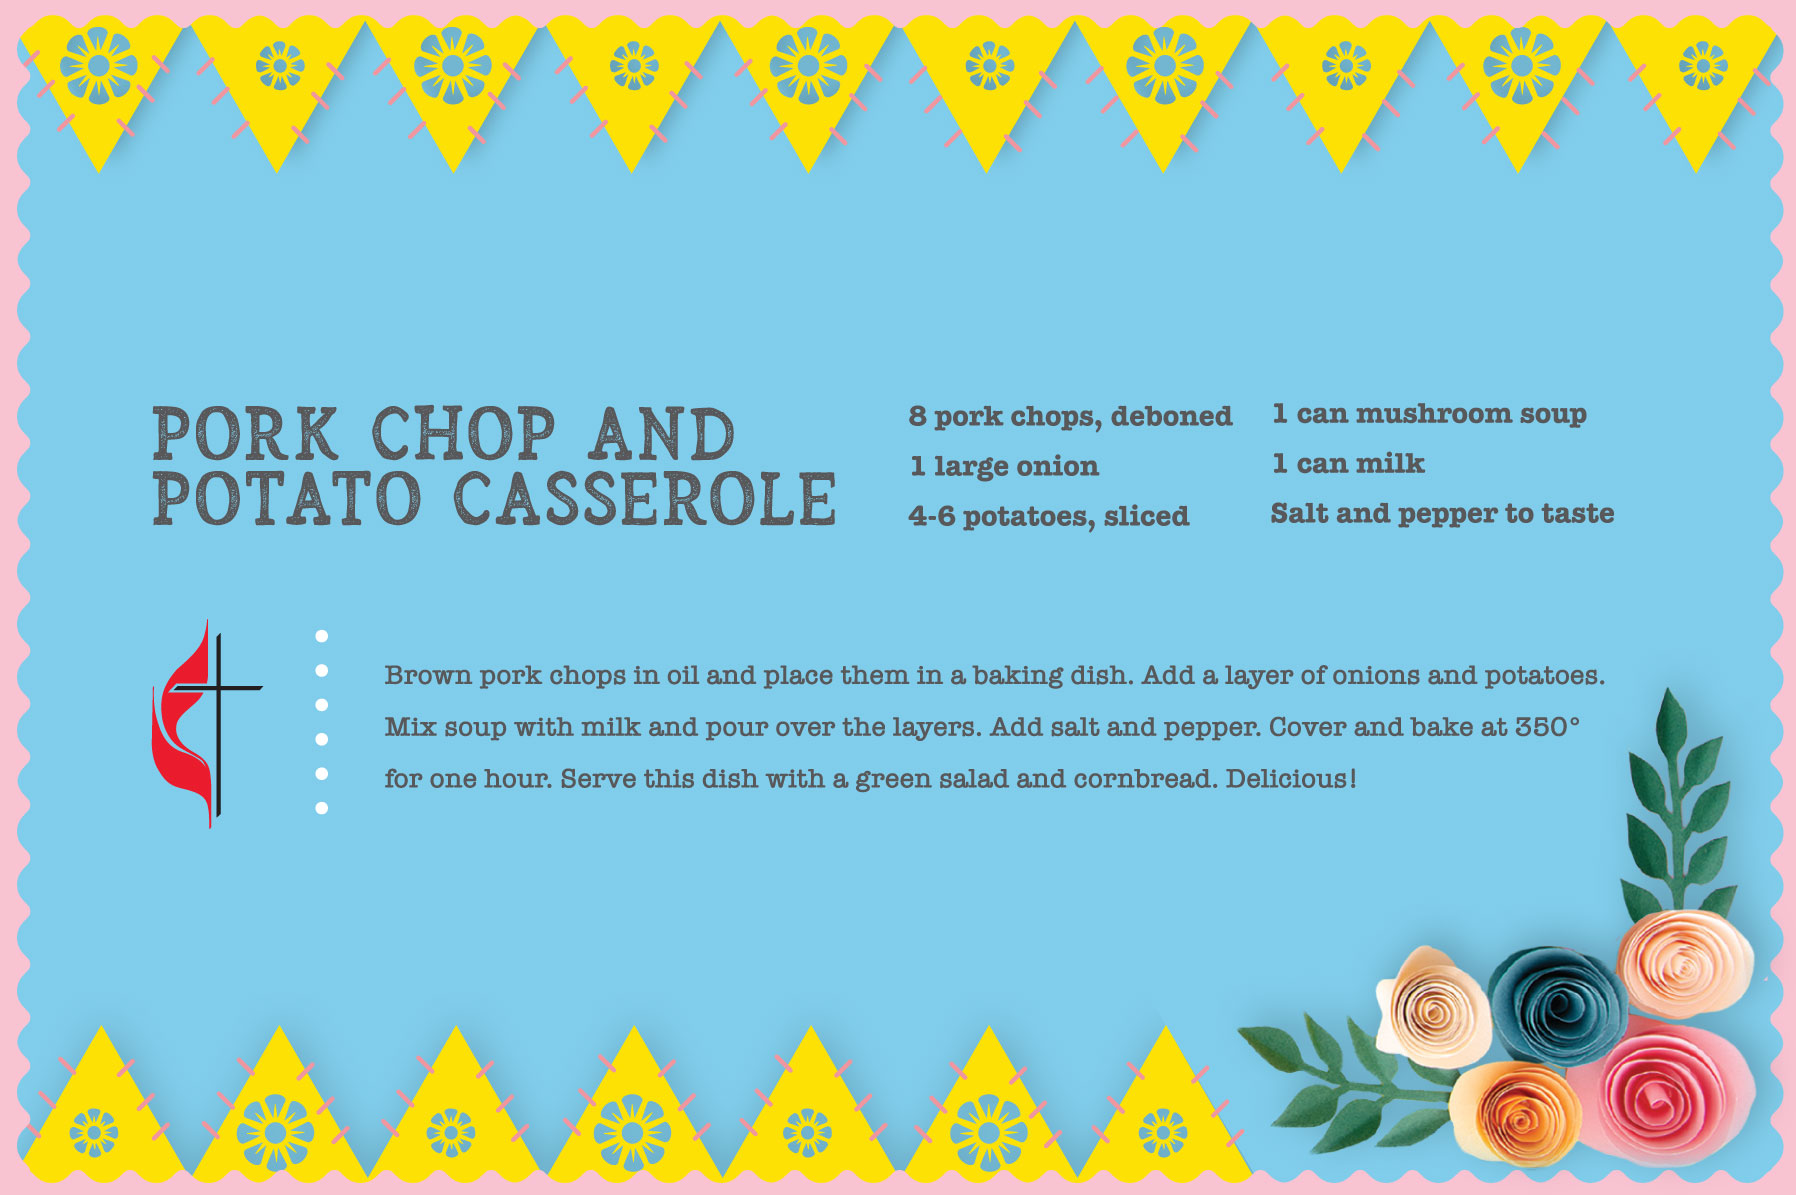 Pork chop and potato recipe for Easter. Design by Sara Schork for United Methodist Communications